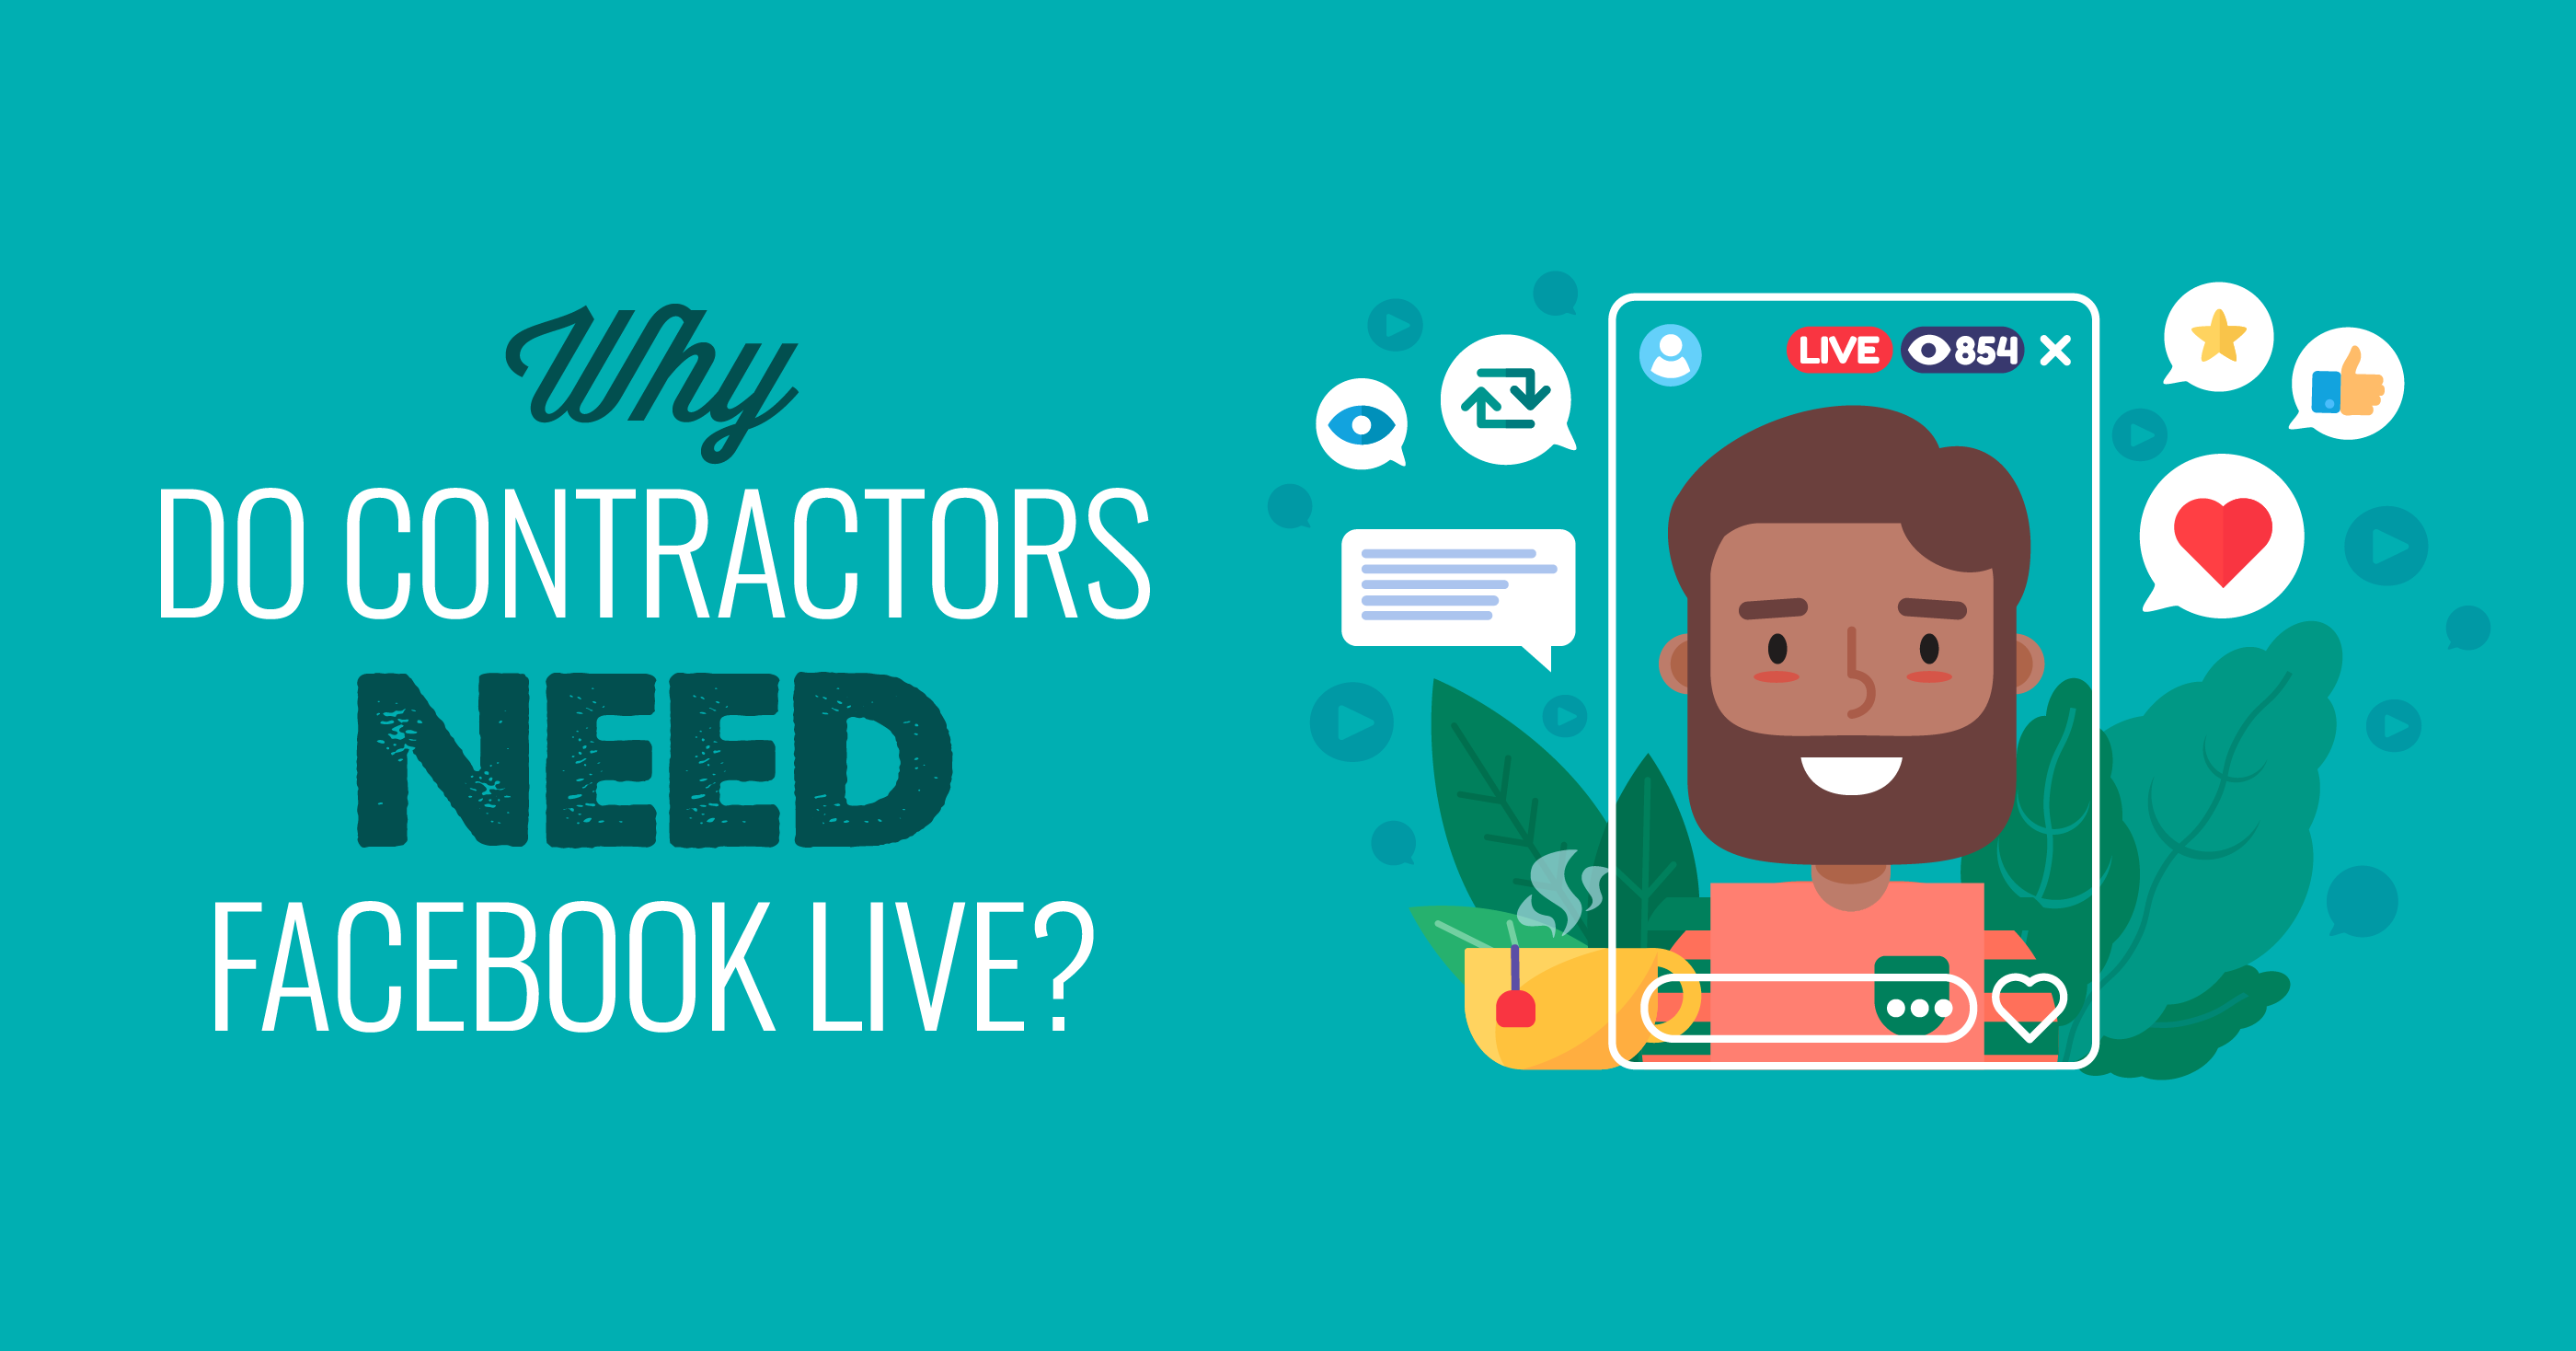 Why do contractors need Facebook live?